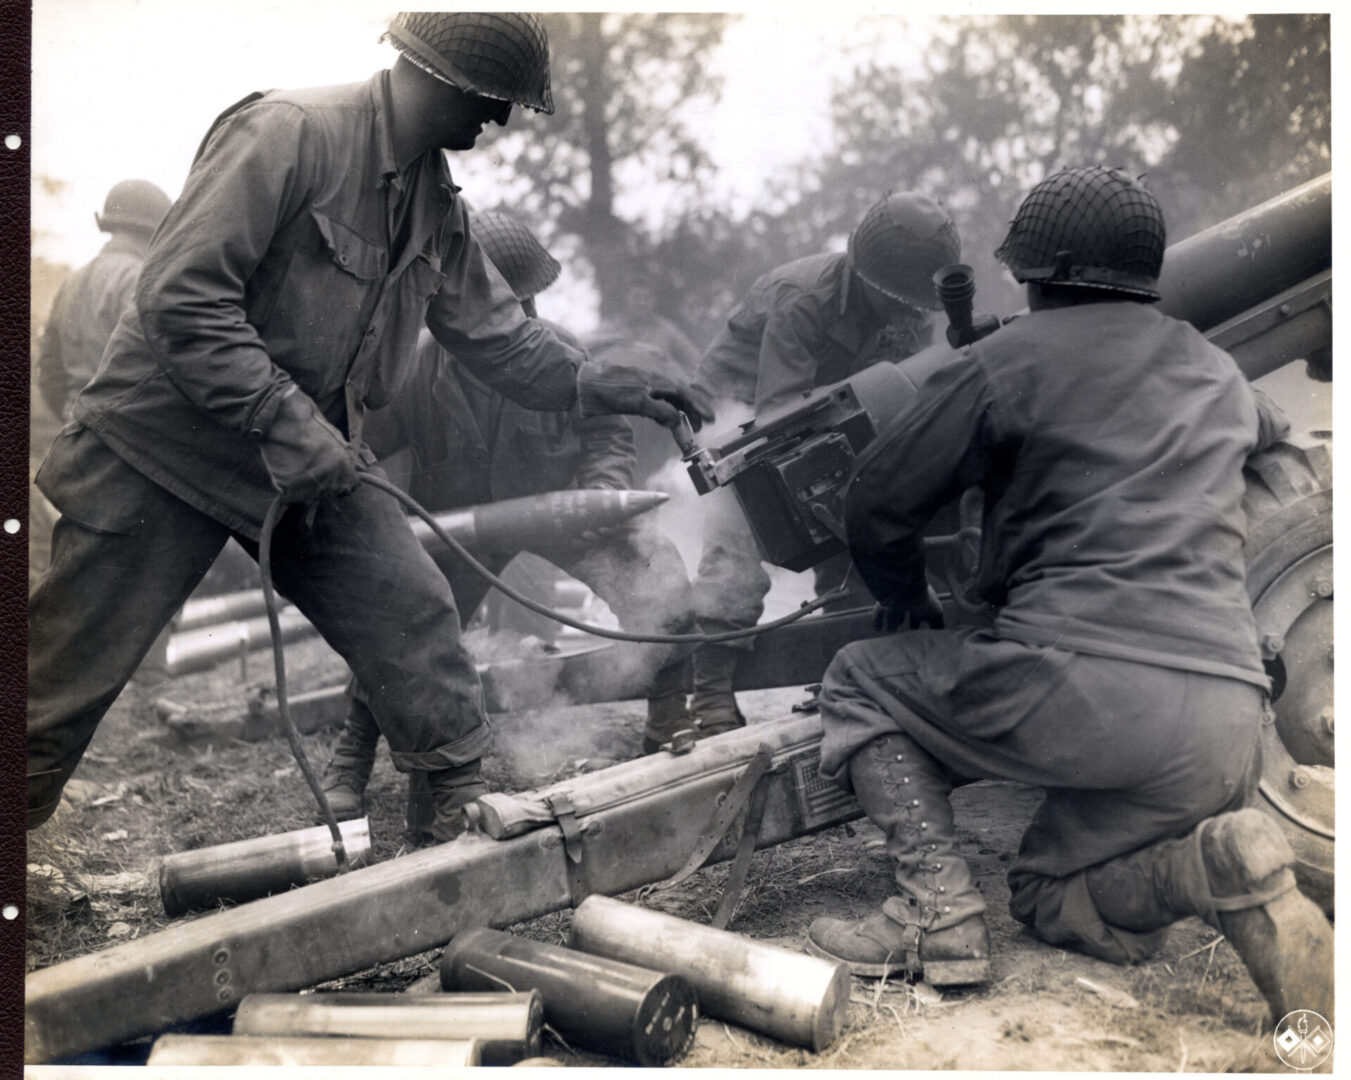 American troops shelling the retreating German forces